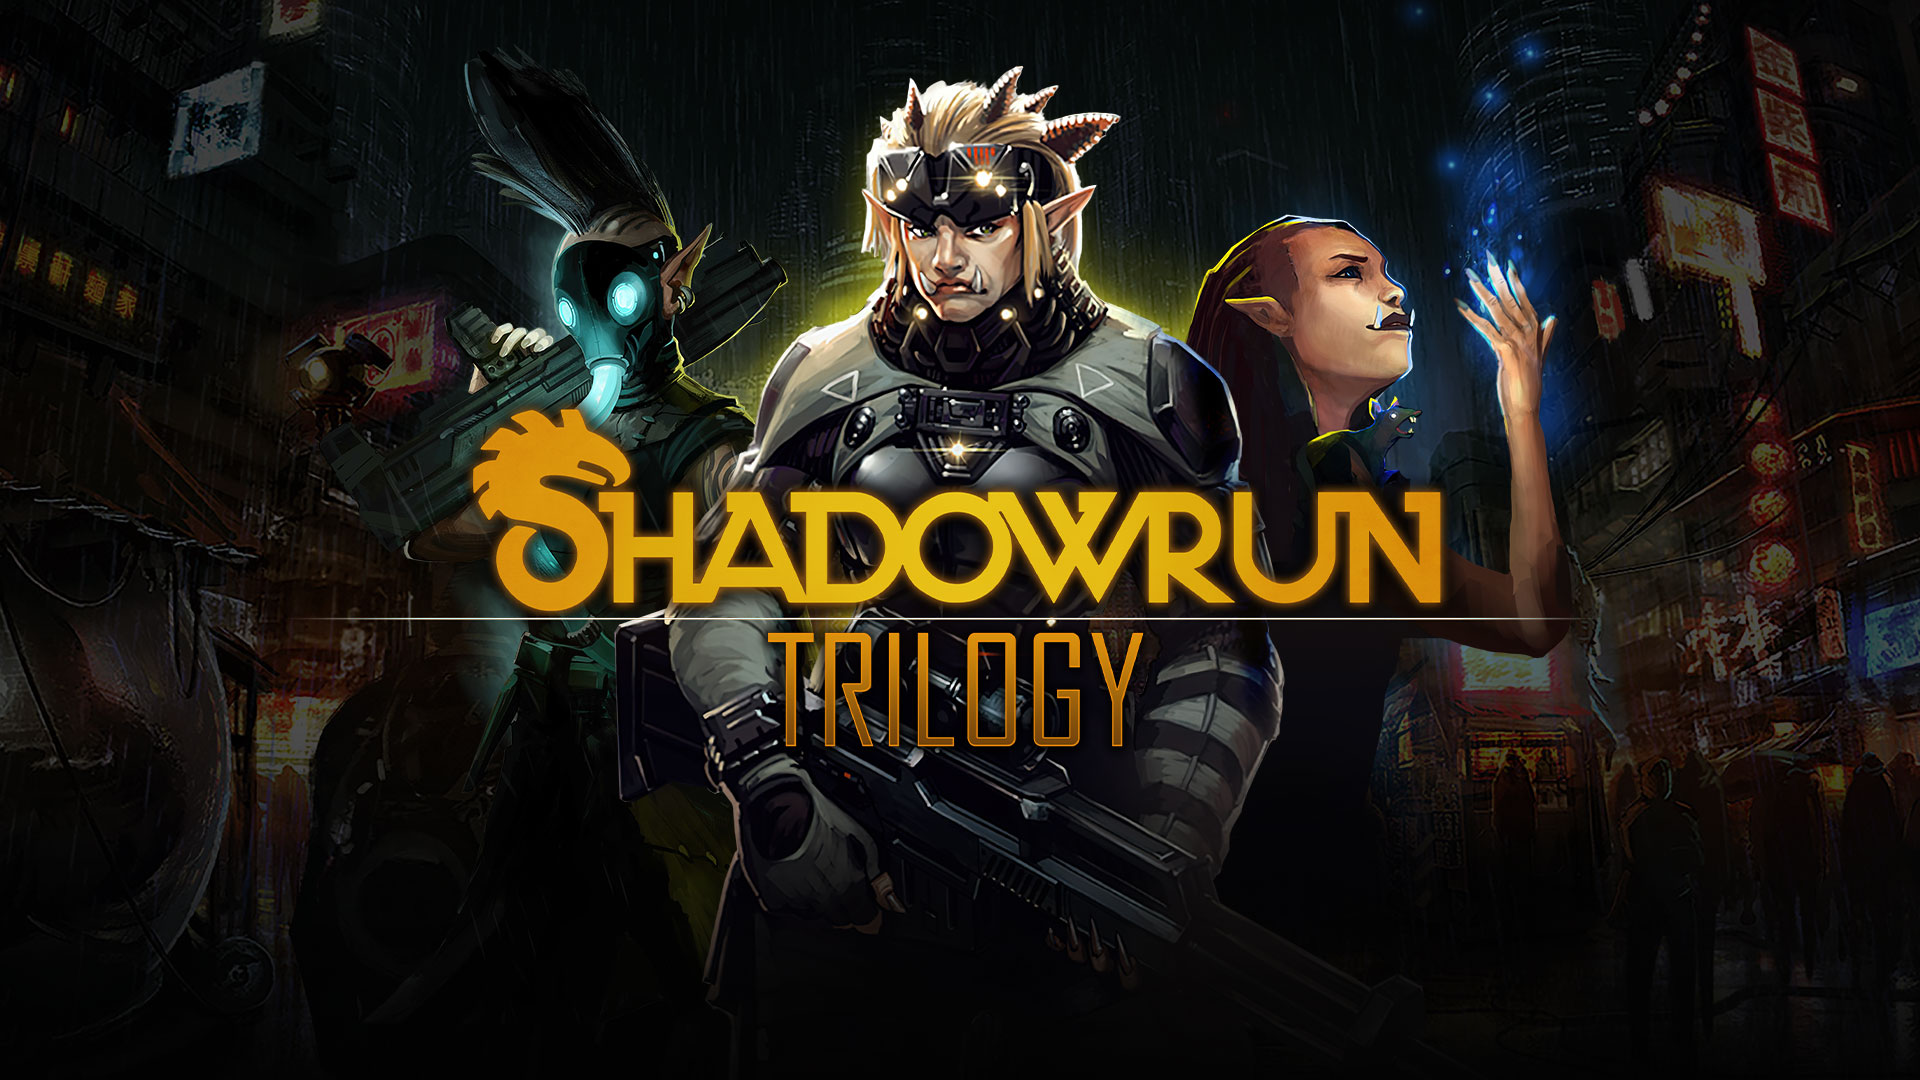 Video For Experience the Original Sci-fi-Fantasy World of Shadowrun in Three Xbox Game Pass Titles